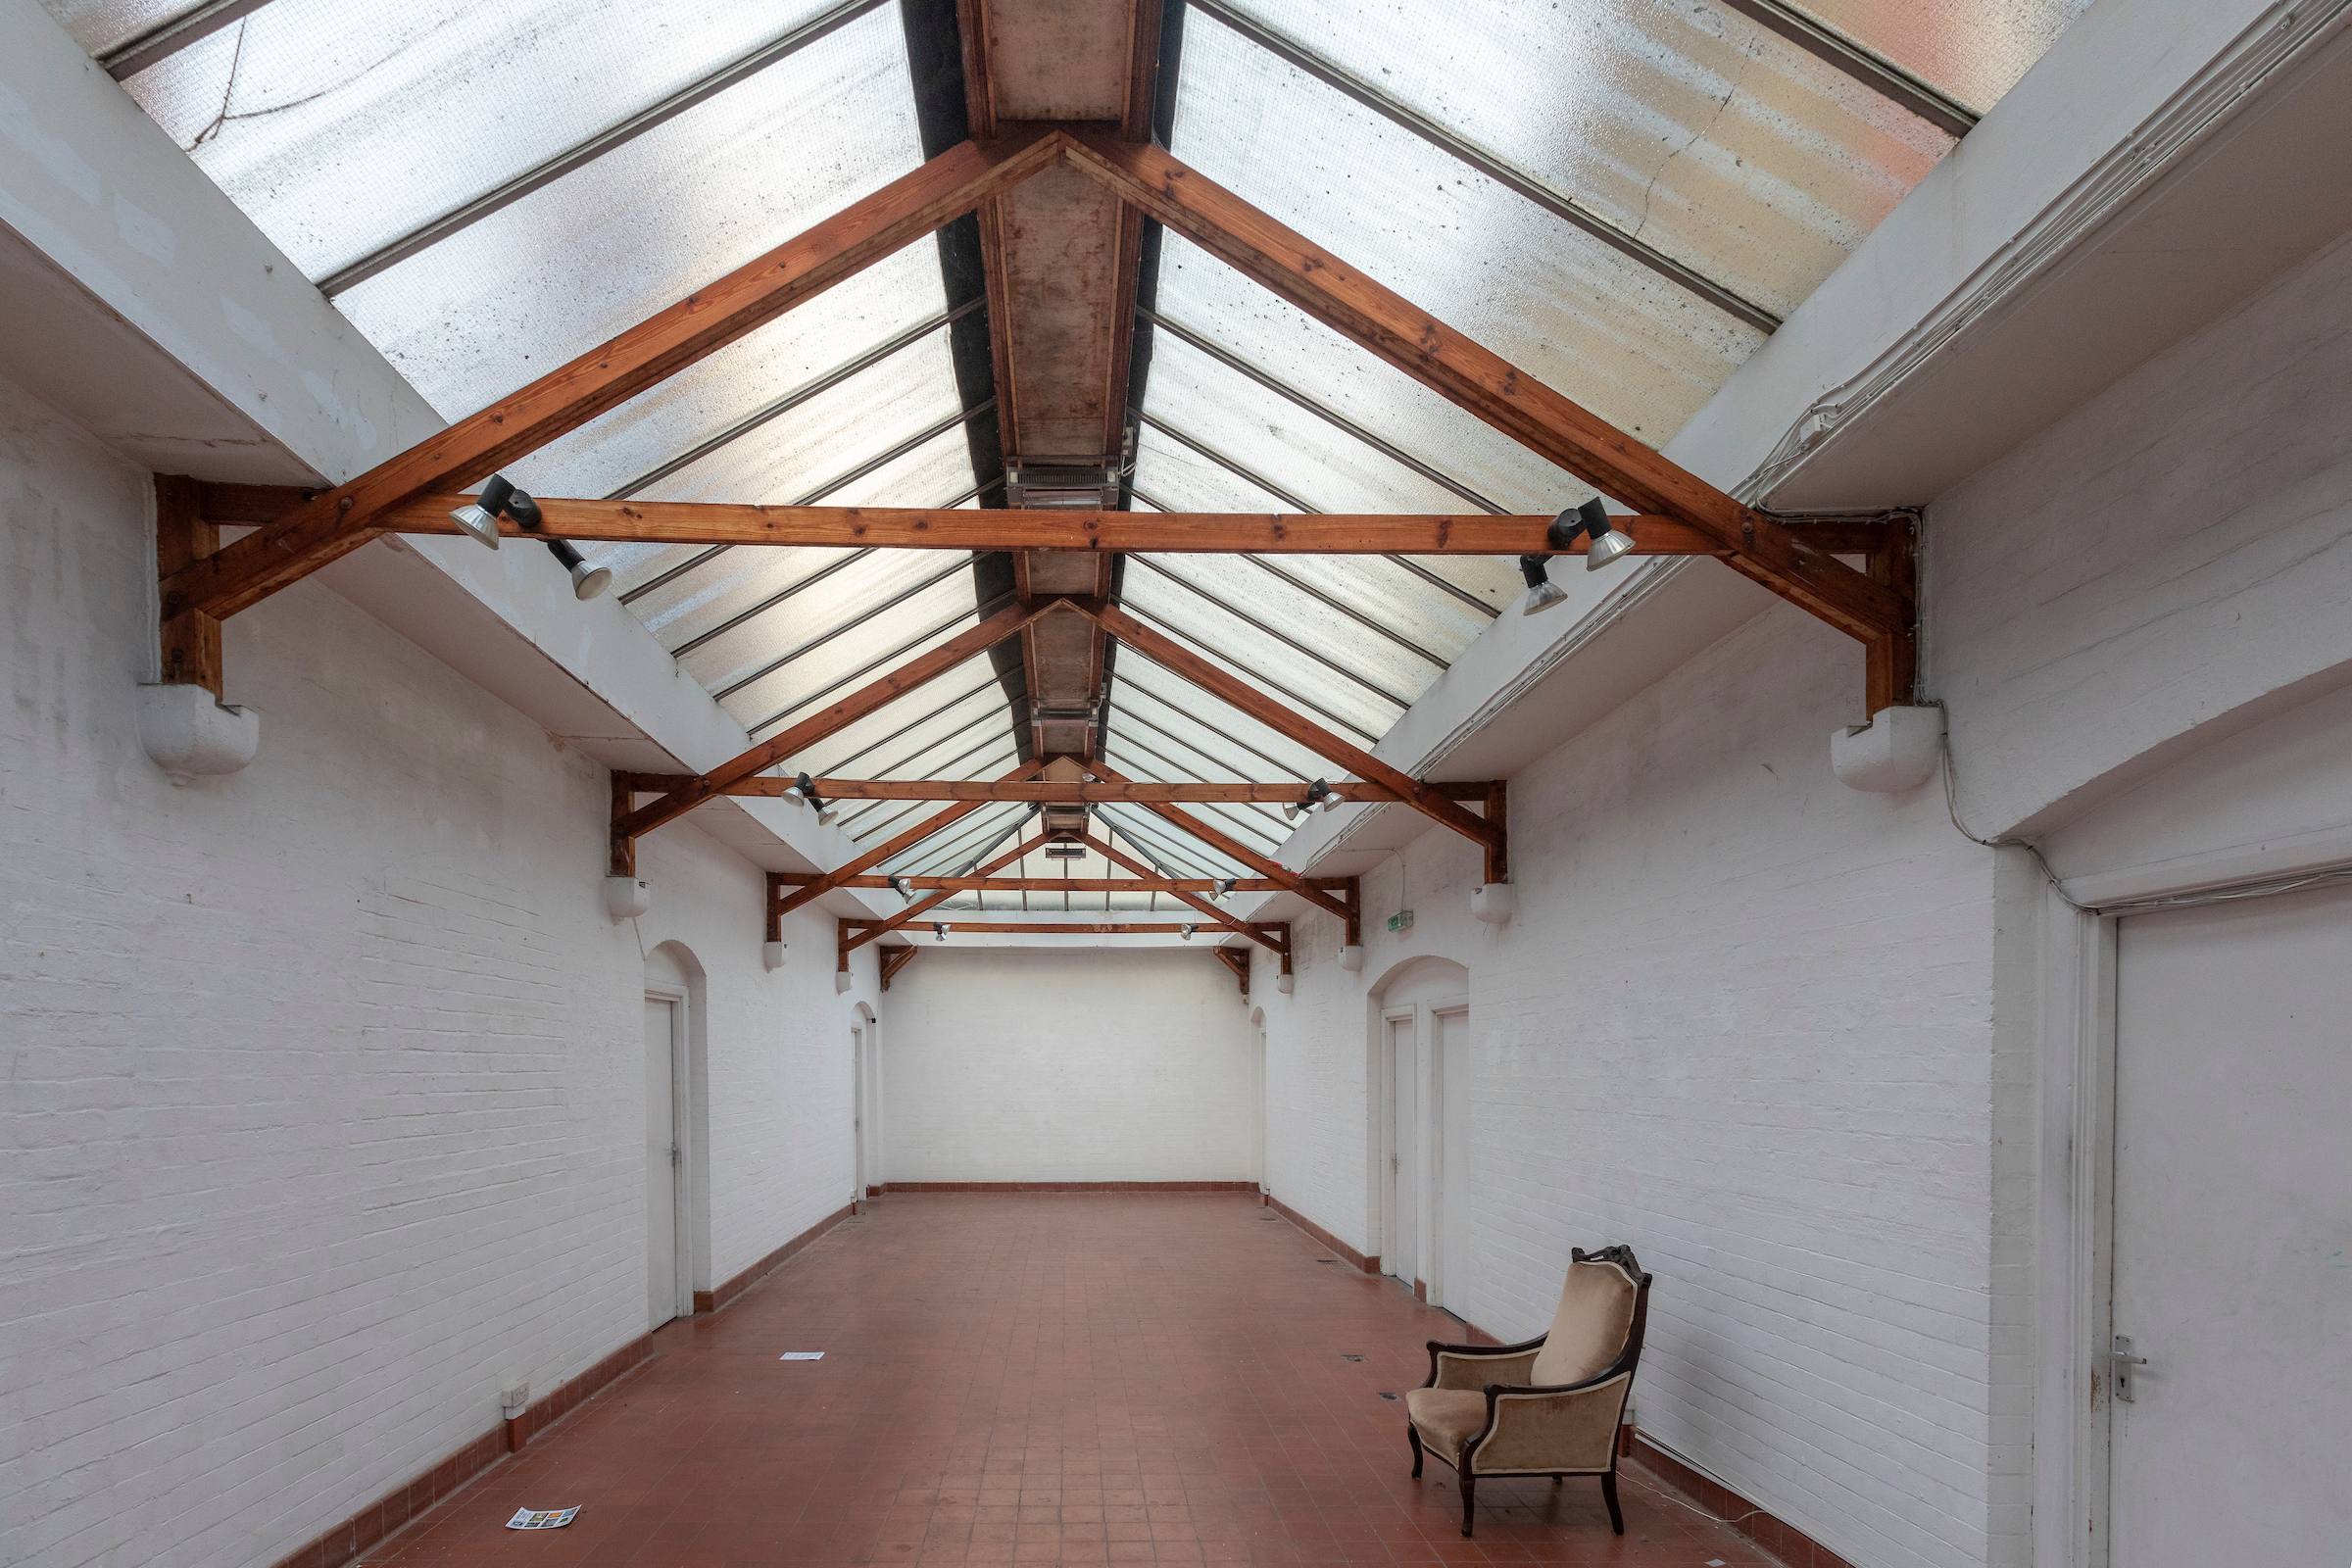 Photograph of a bright gallery space, wooden beams and glass roof.